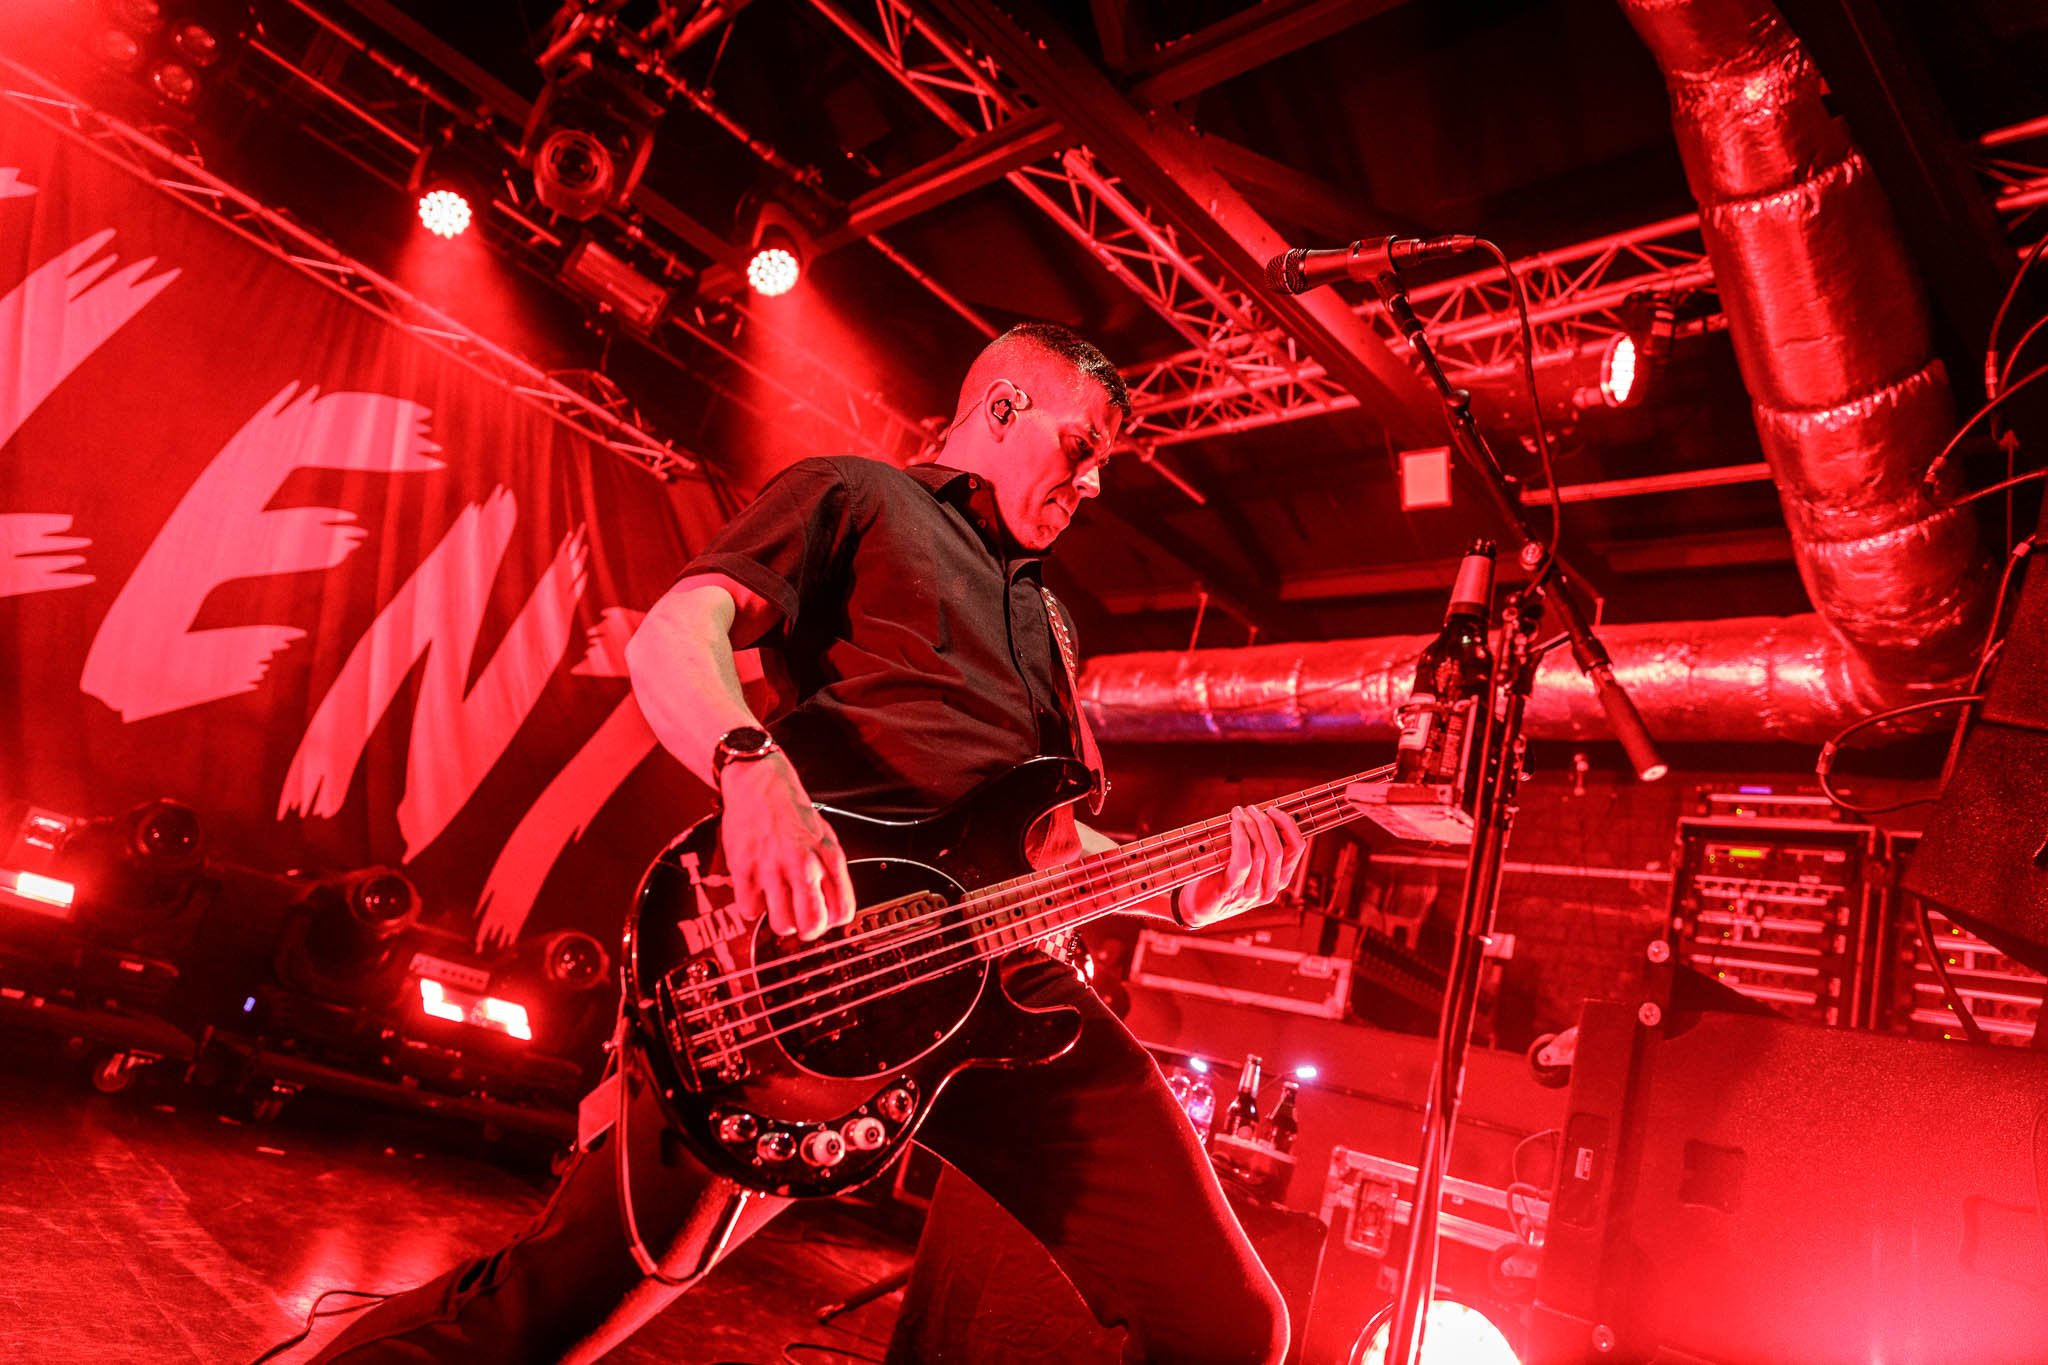 Billy Talent at the O2 Academy in Liverpool on June 16th 2022 ©